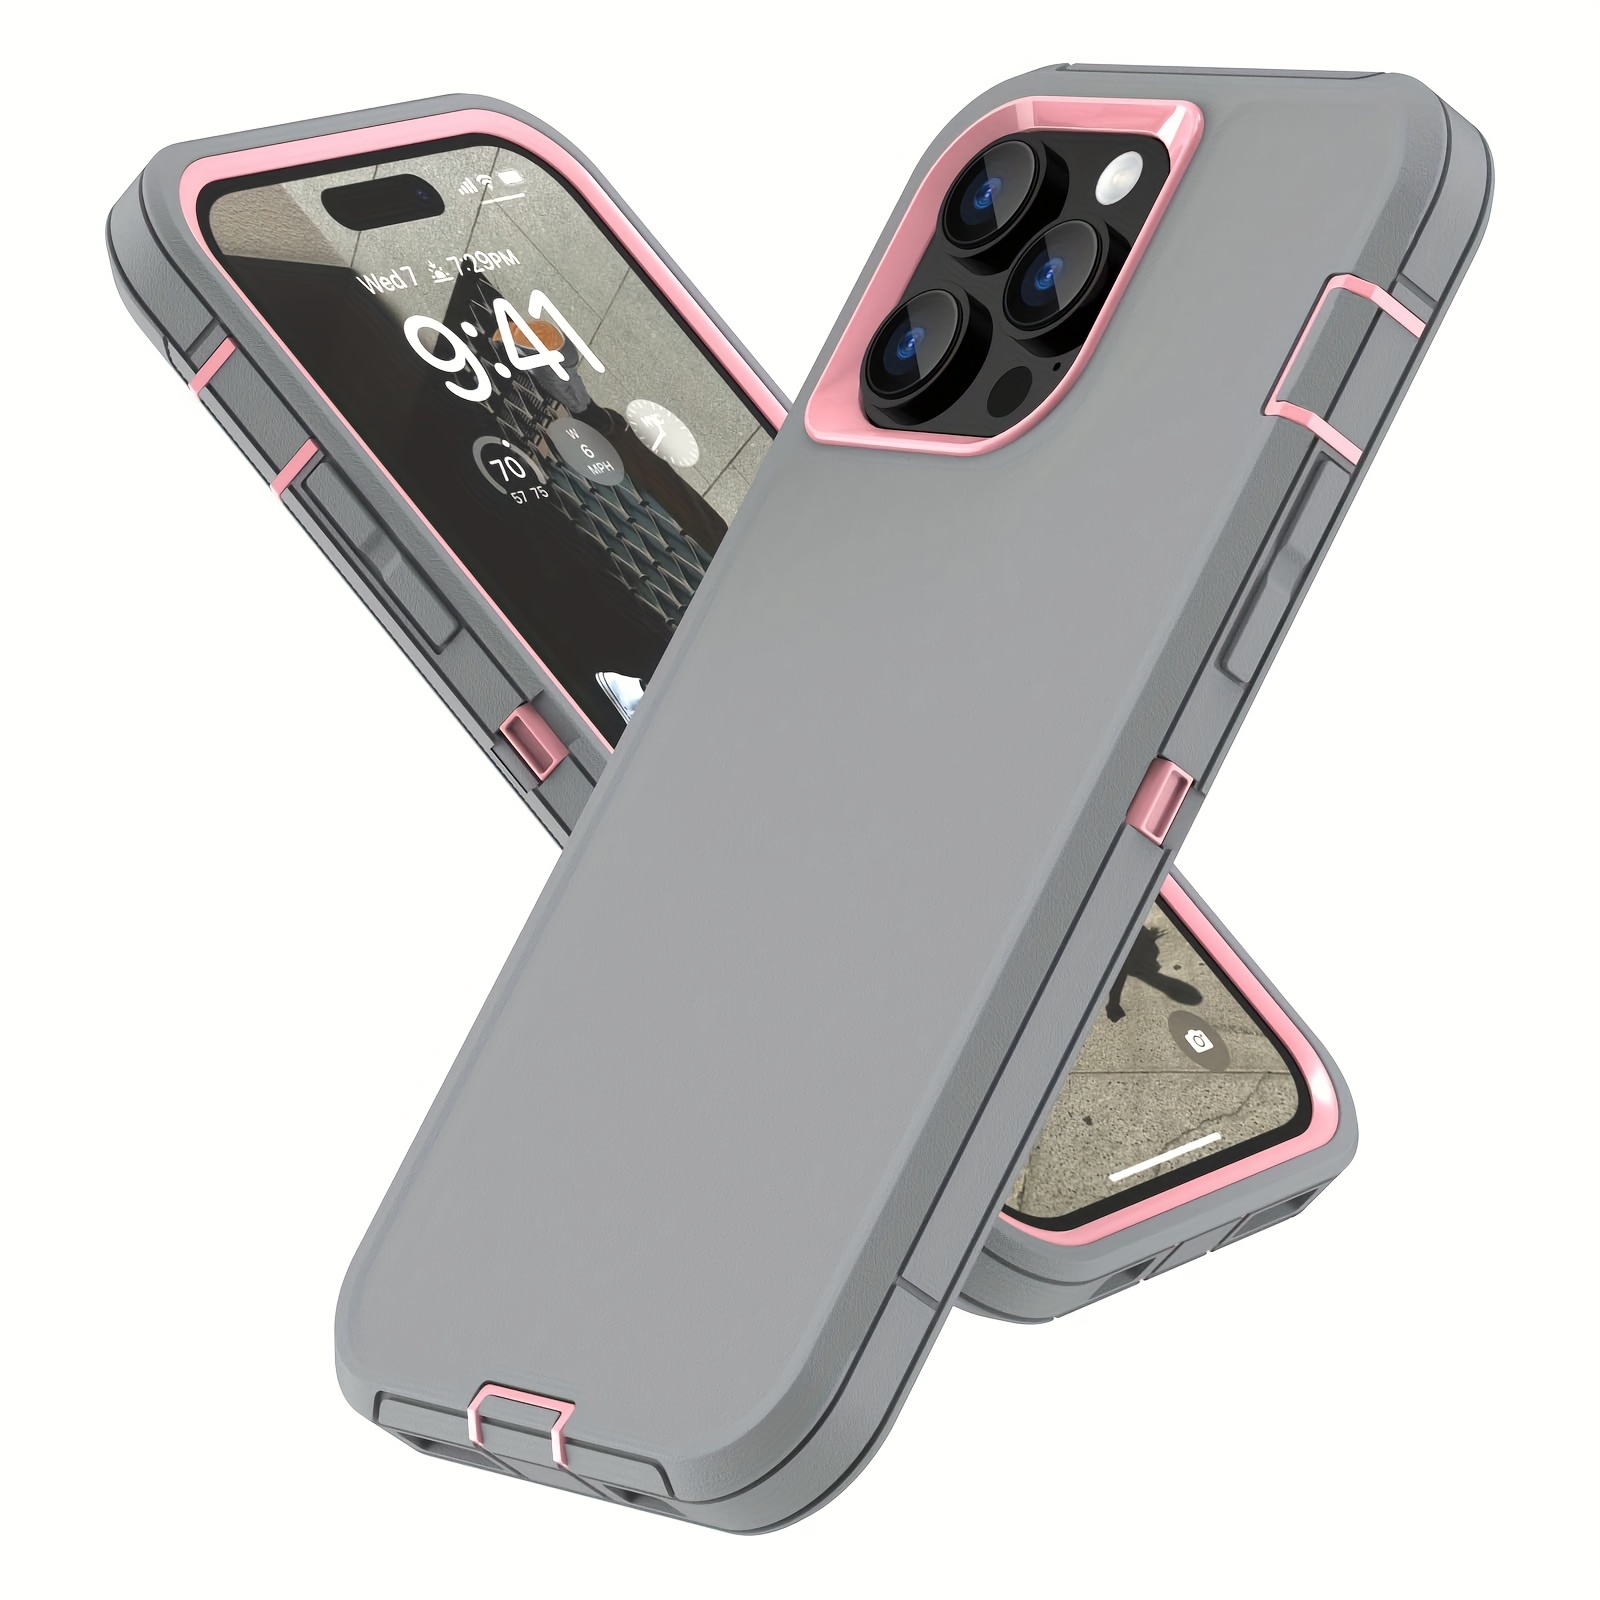 Kiq iPhone 12 Pro Max Case TPU Rugged Impact Scratch/Drop Protection Cute Stylish Fashionable Case Cover for Apple iPhone 12 Pro Max (Large Pink